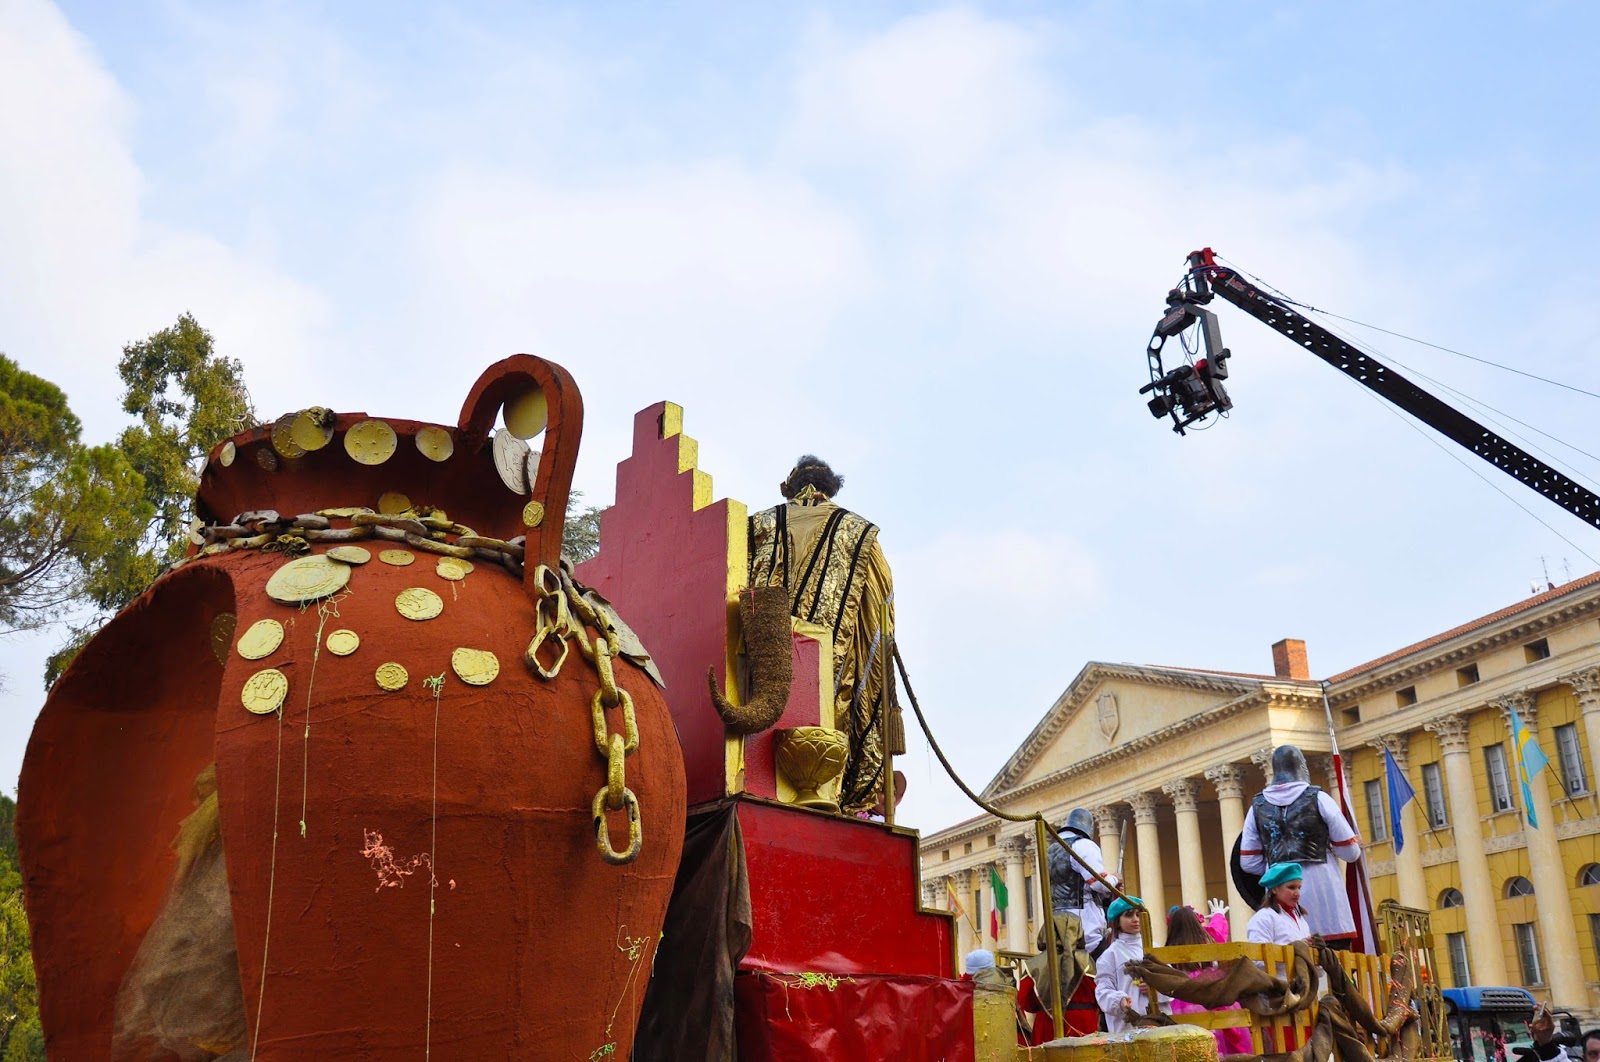 A large float faces the steadicam at the parade for Verona Carnival